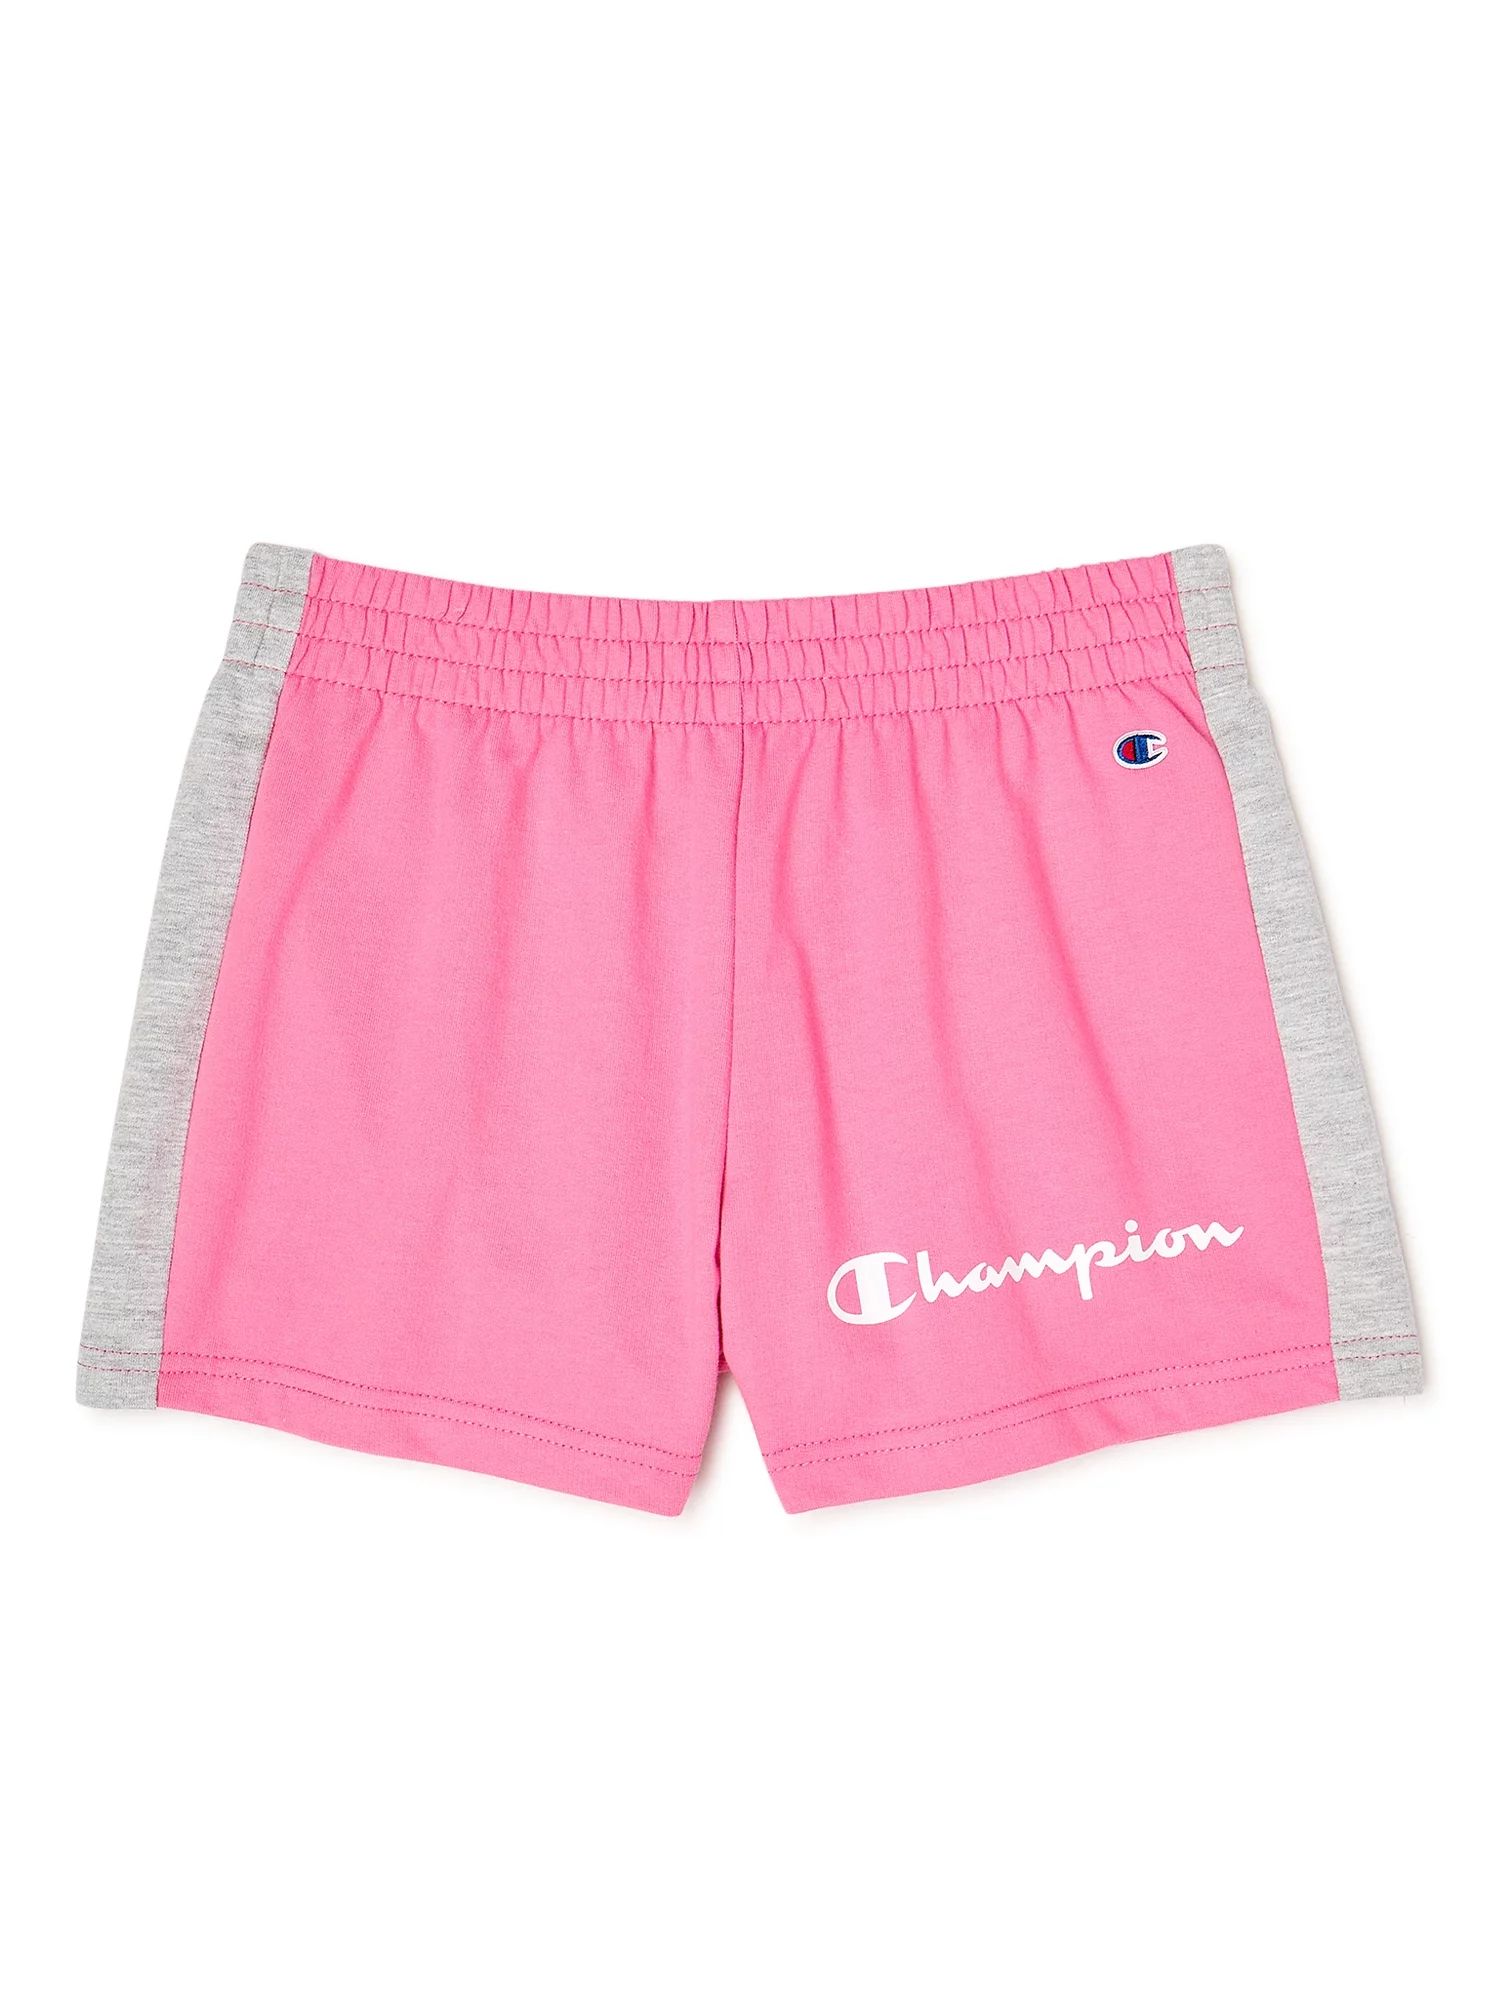 Champion Girls’ Side Taped French Terry Shorts, Sizes 7-16 | Walmart (US)